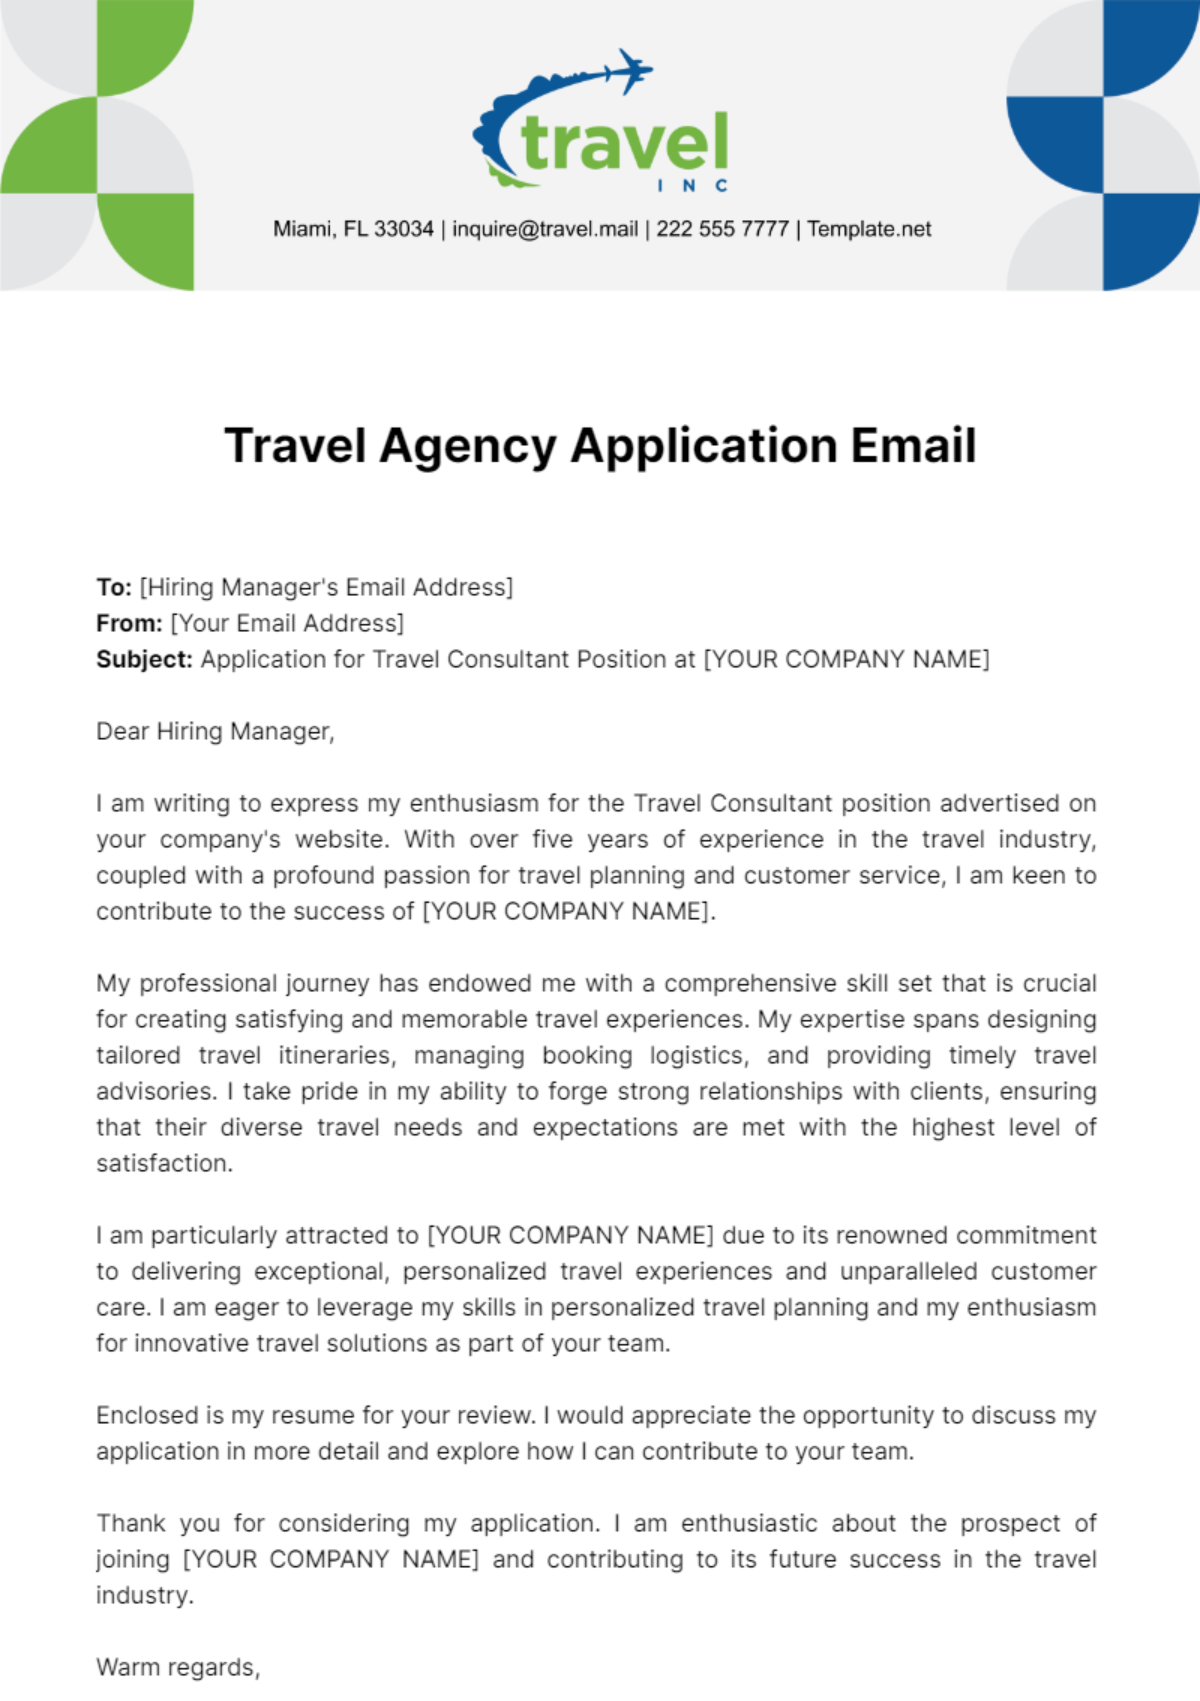 Travel Agency Application Email Template